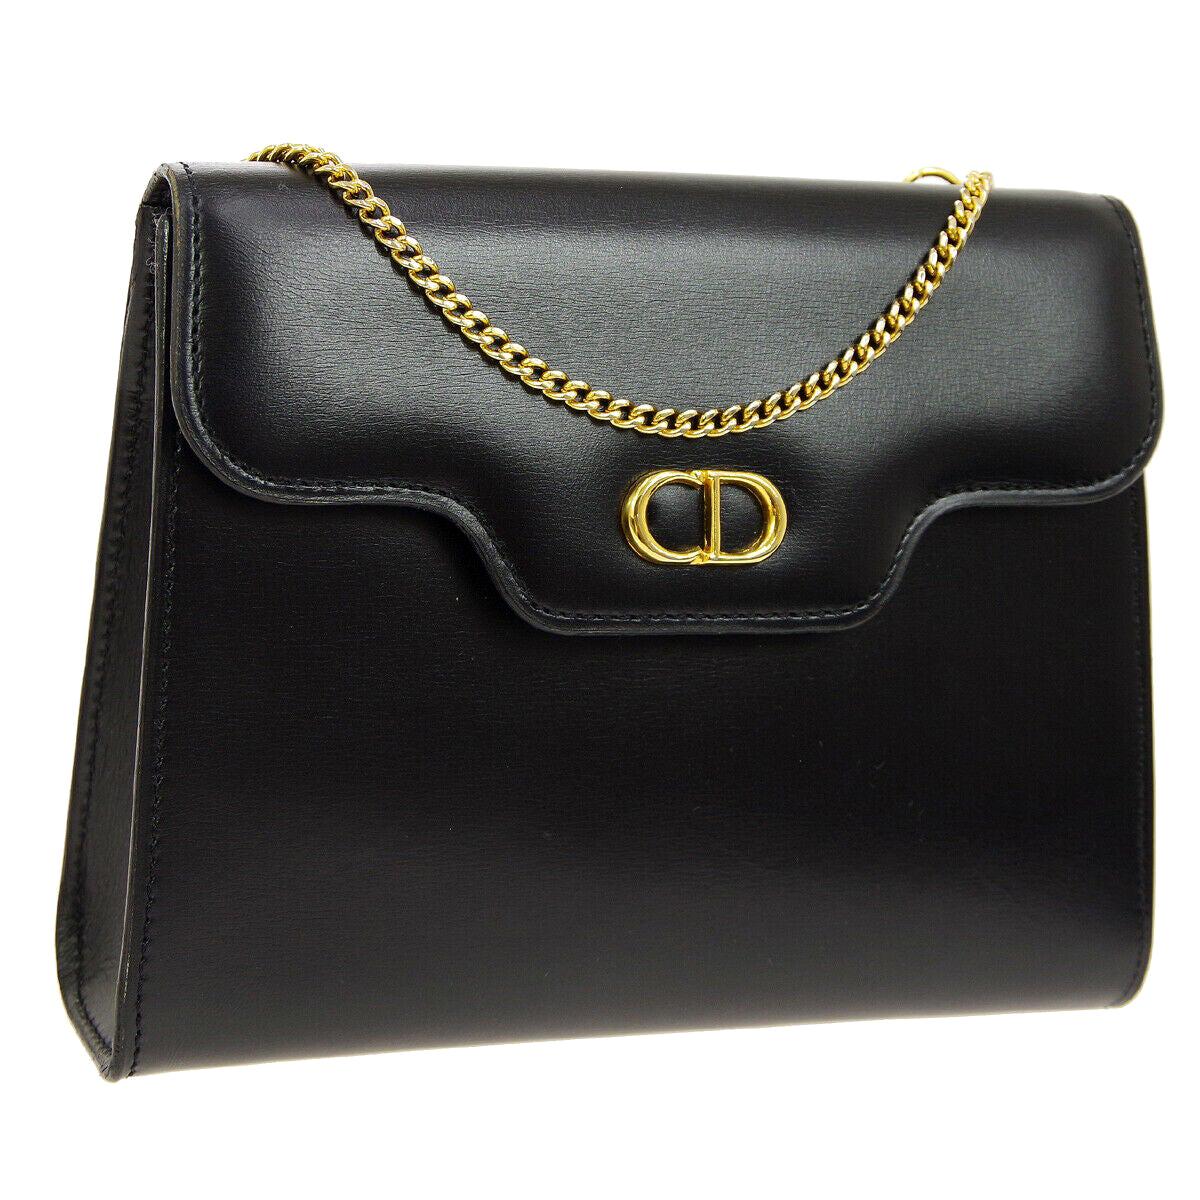 Christian Dior Small Black Leather Gold 2 in 1 Clutch Shoulder Flap Bag in Box